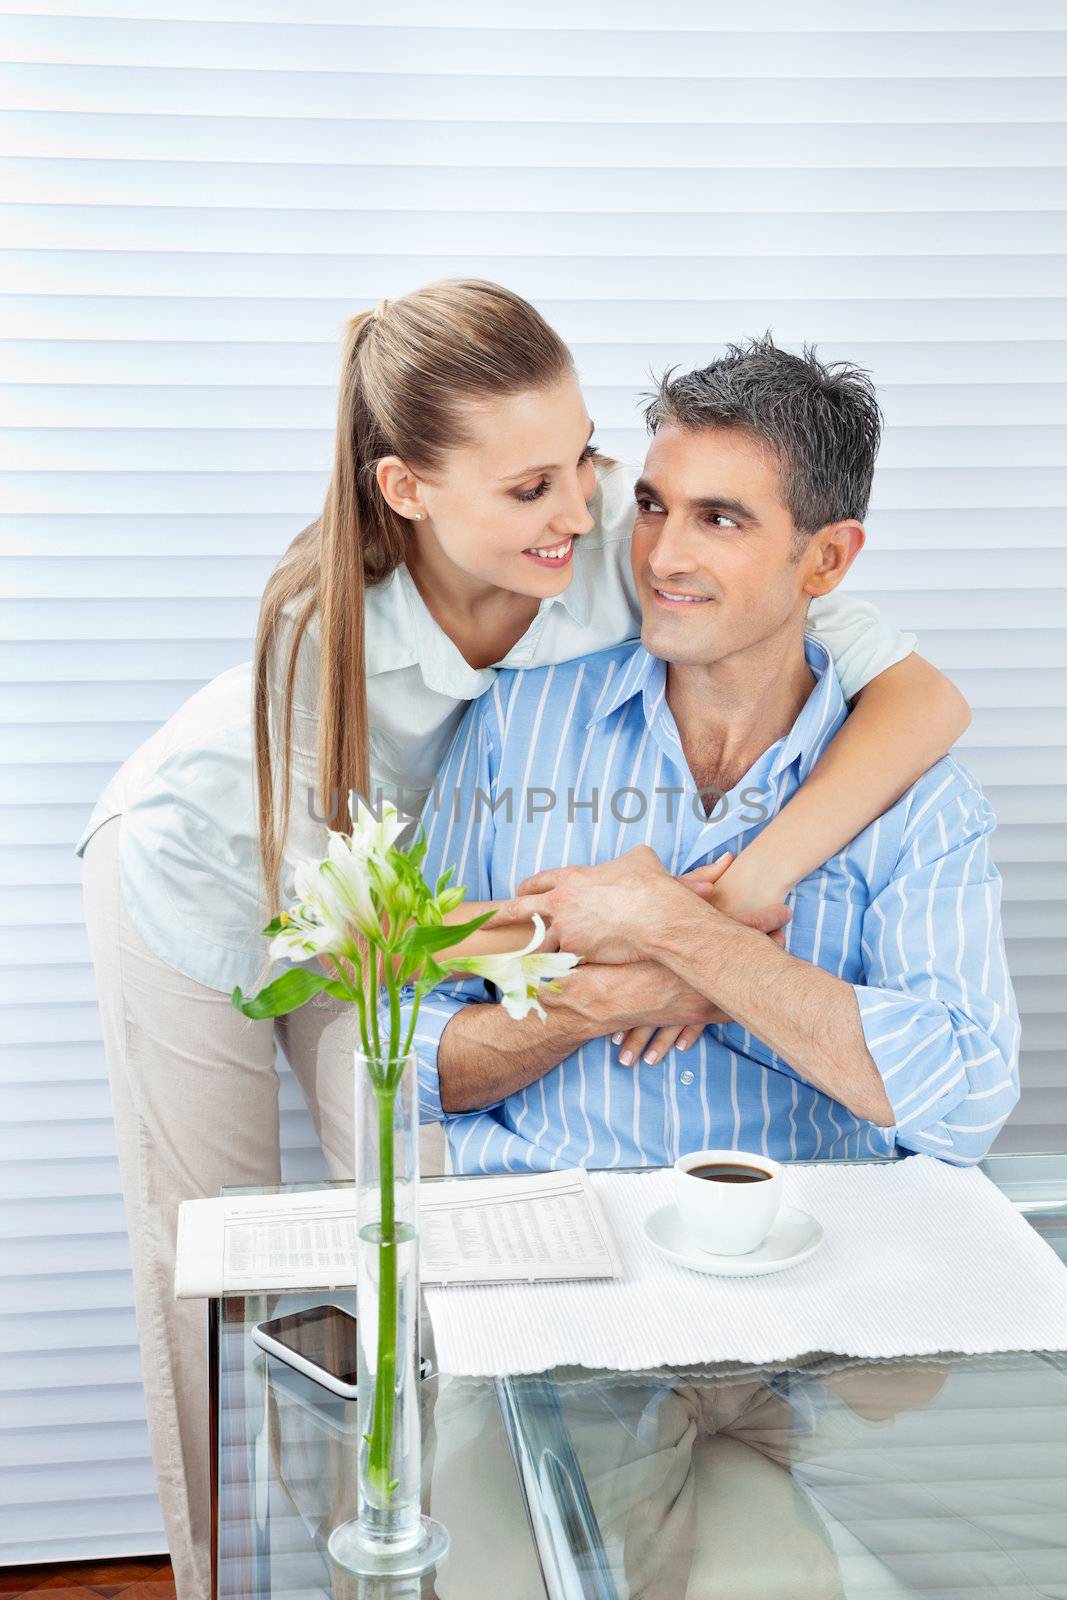 Couple looking at each other while embracing by a table